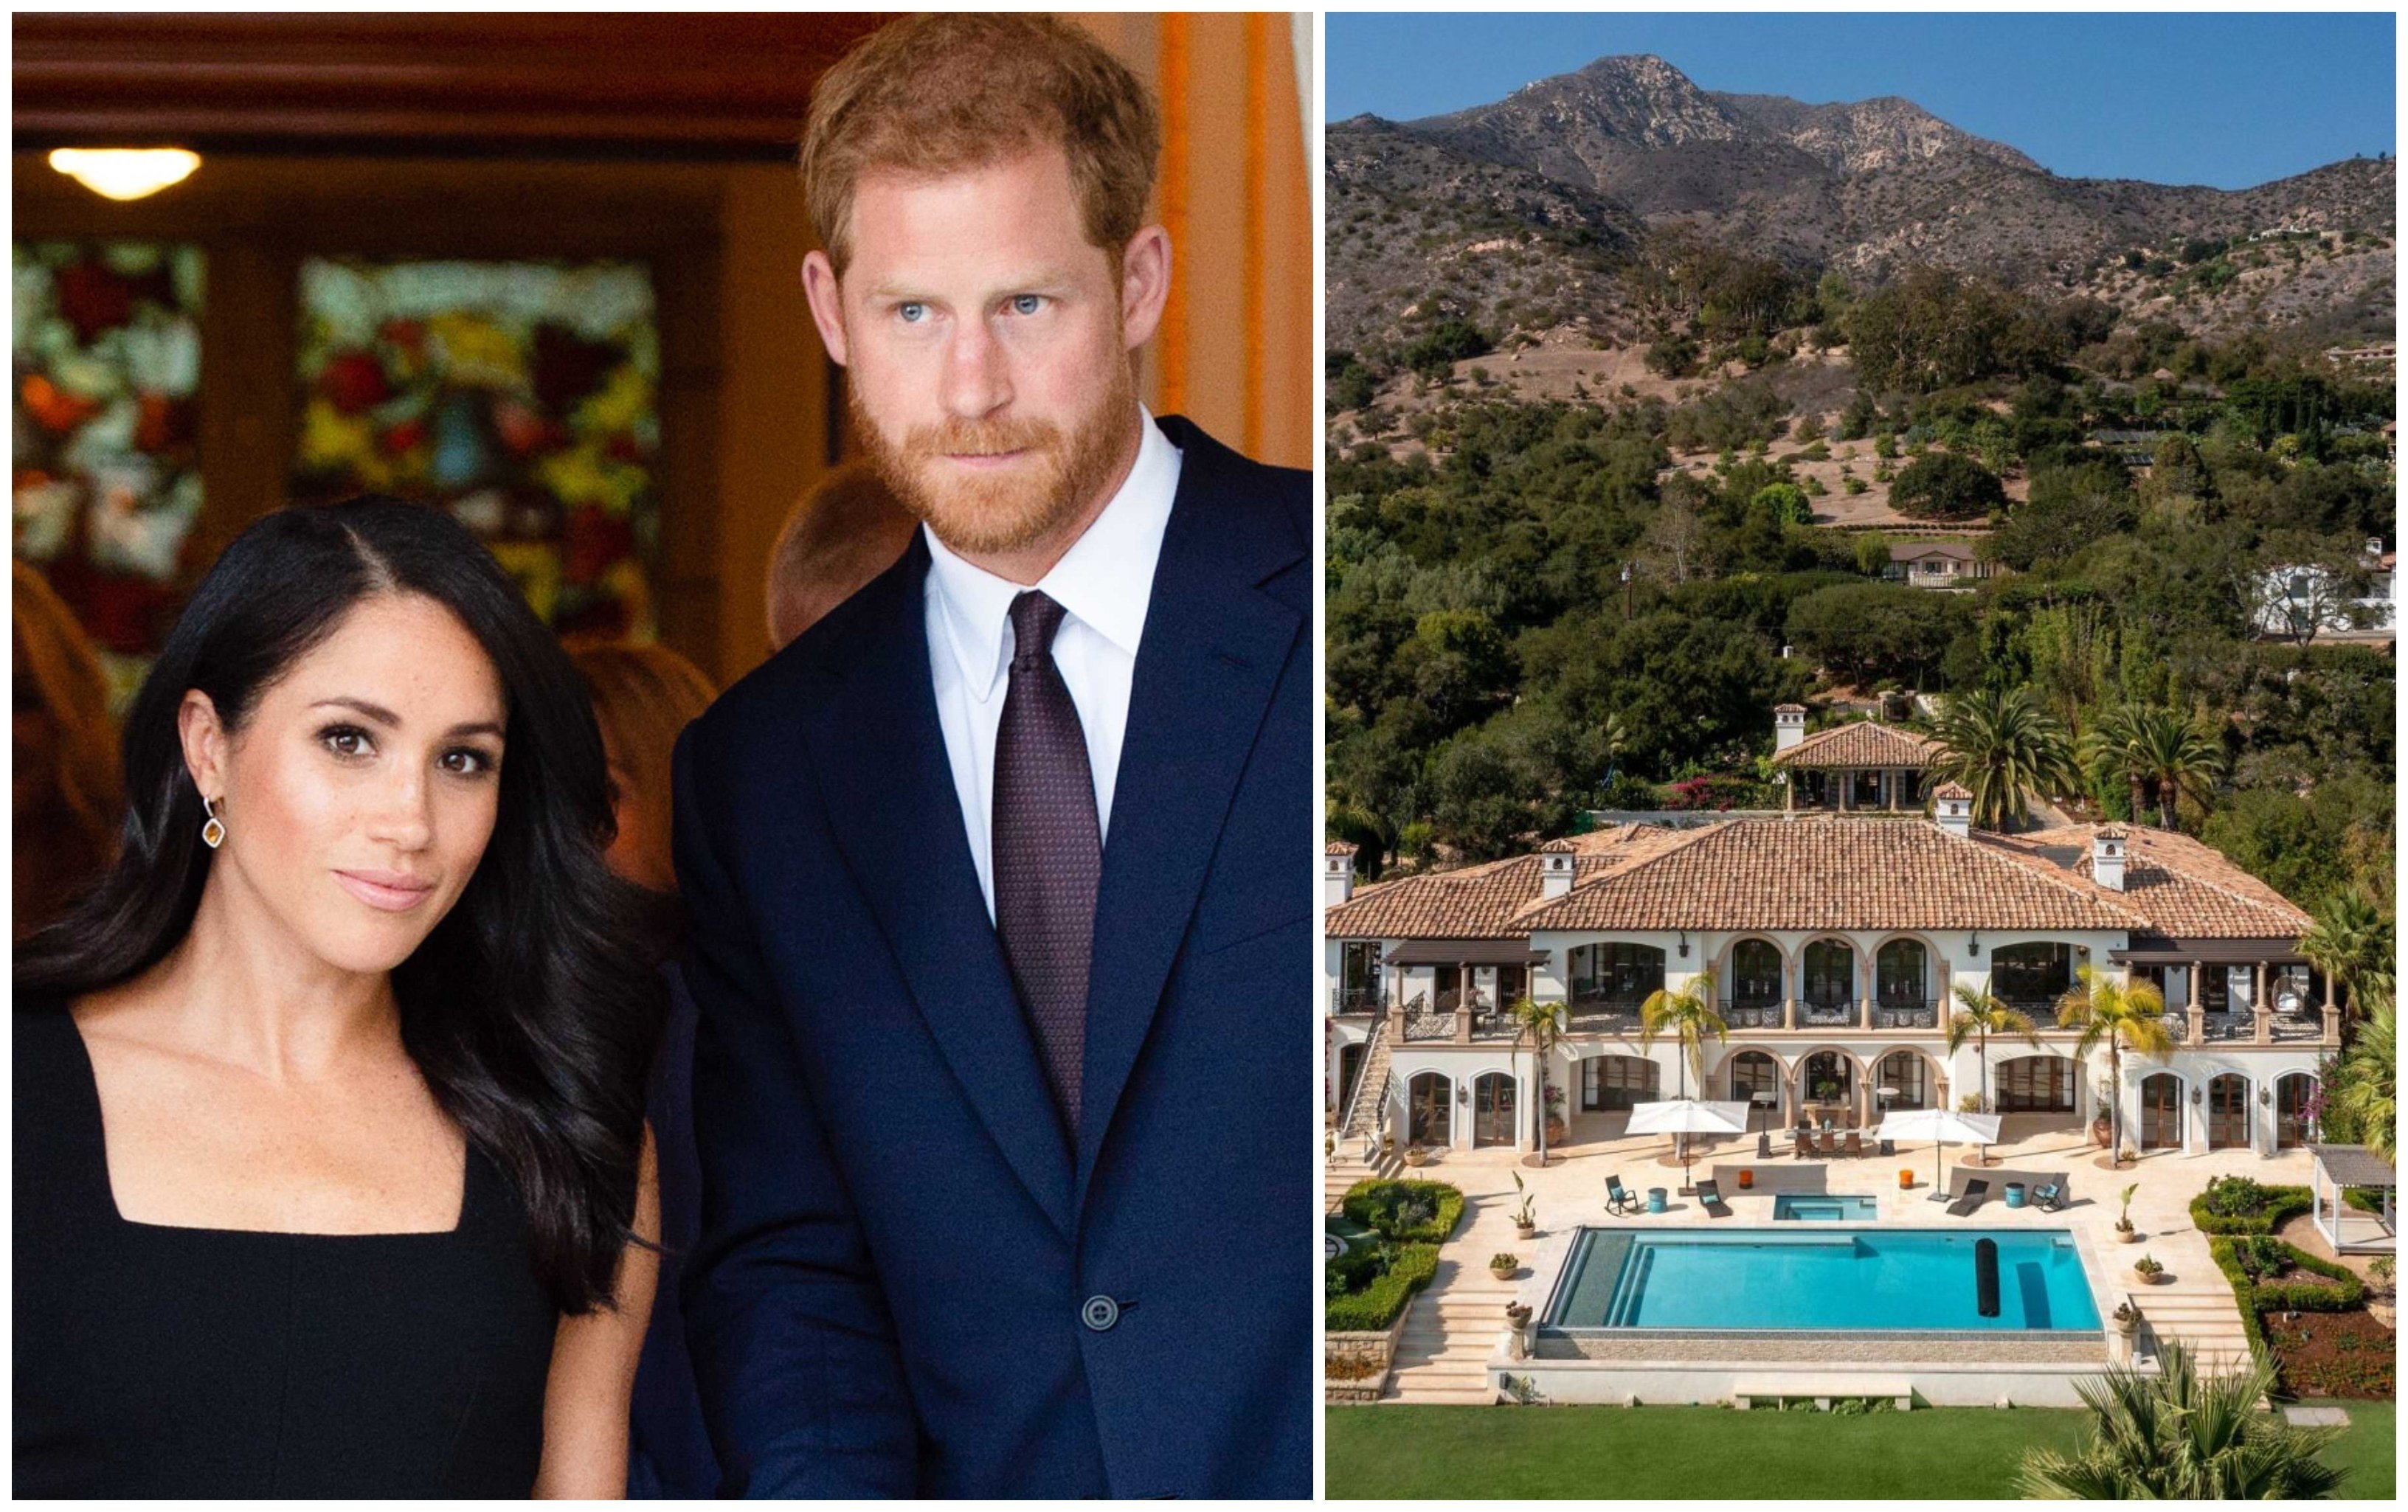 The Sussexes’ mansion, seen on Netflix’s Harry & Meghan docuseries, is now listed for sale... take a peek inside their picturesque Montecito home. Photos: WireImage, Top Ten Real Estate Deals